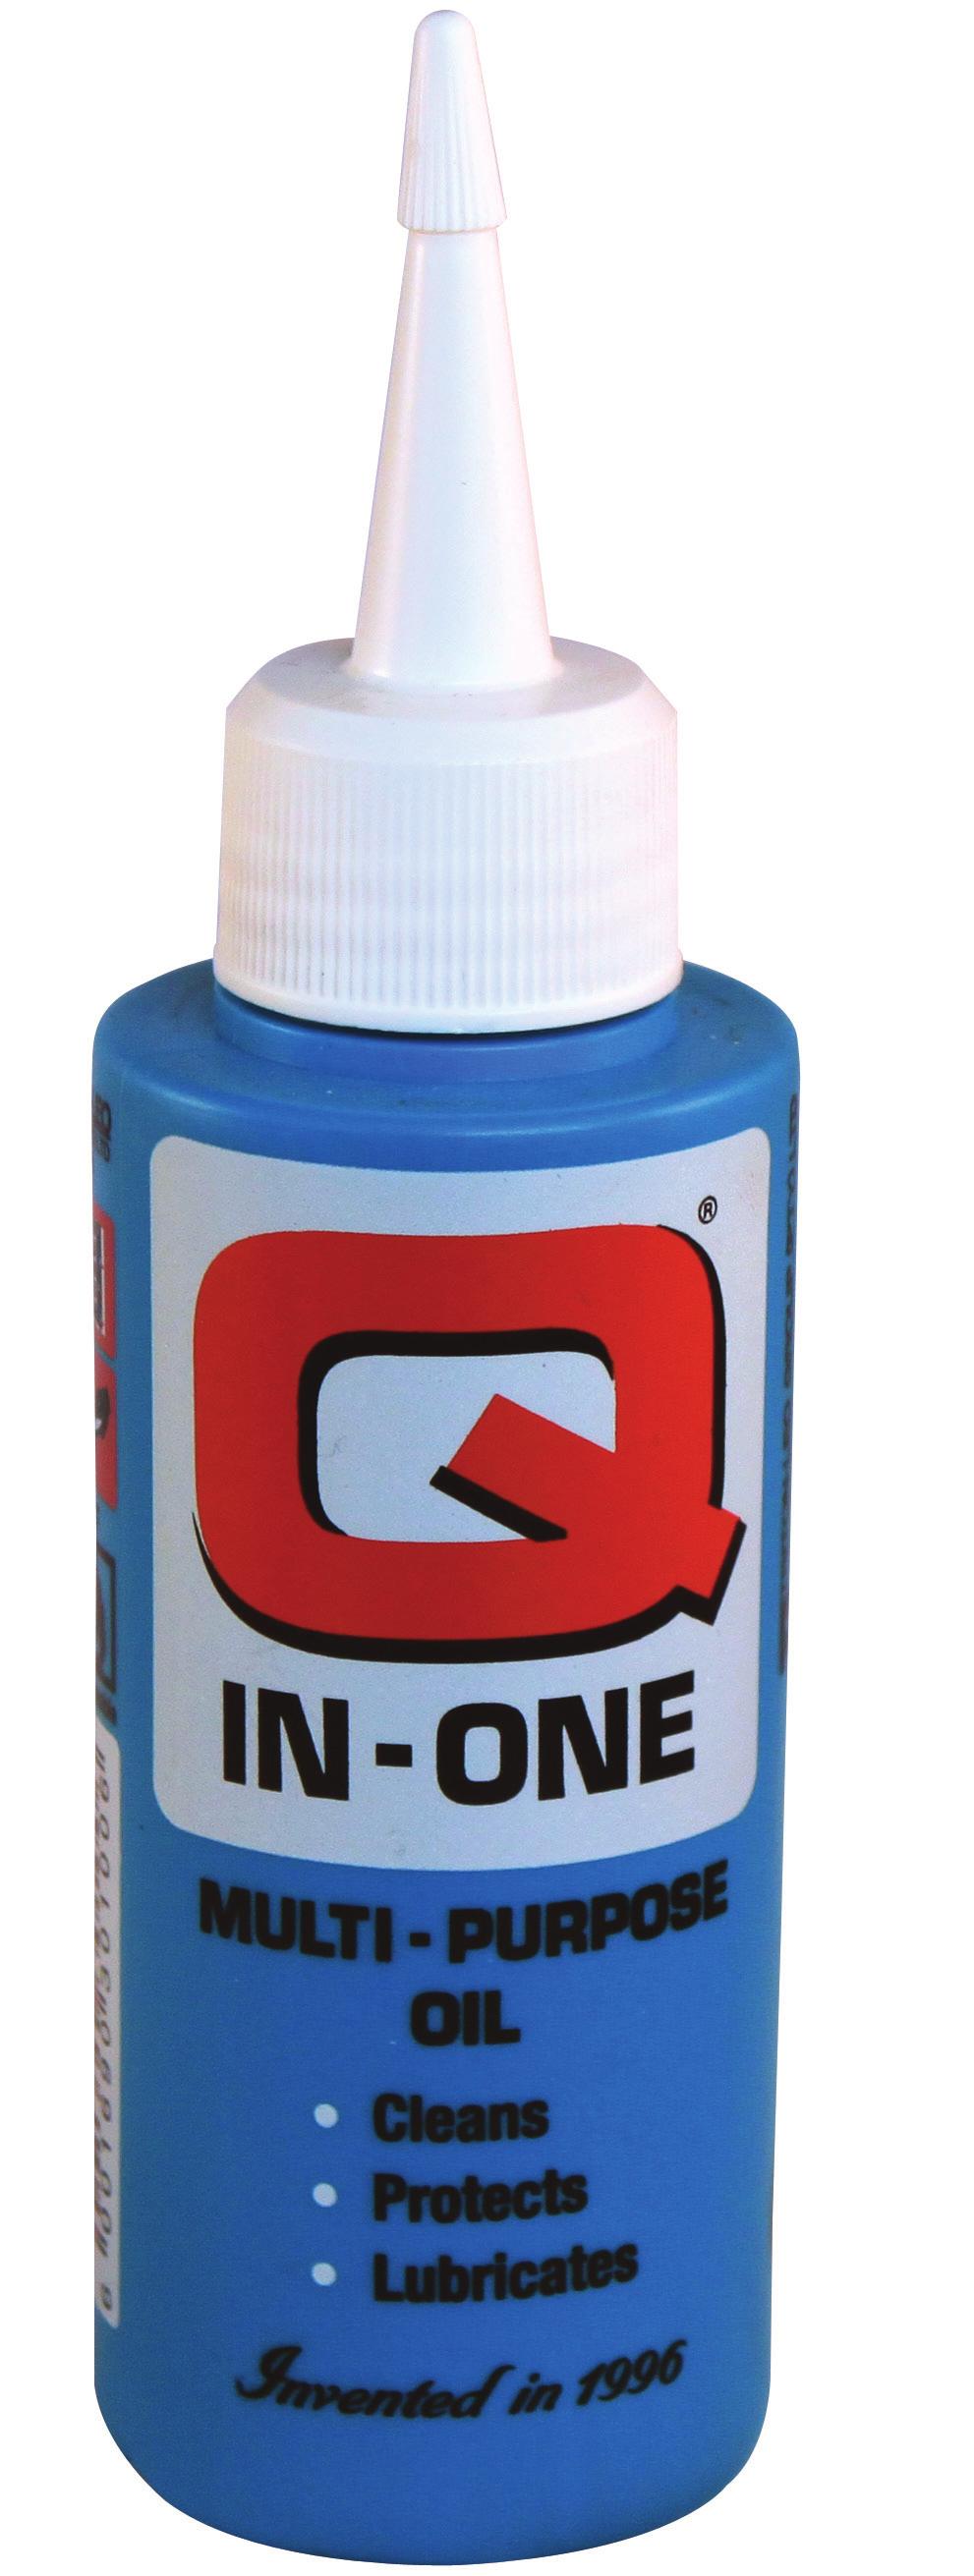 in-one multi-purpose oil lubricates Cleans ProteCts ProduCt information Q-In-One is a high-tech general purpose lubricant for all household and special industrial applications.